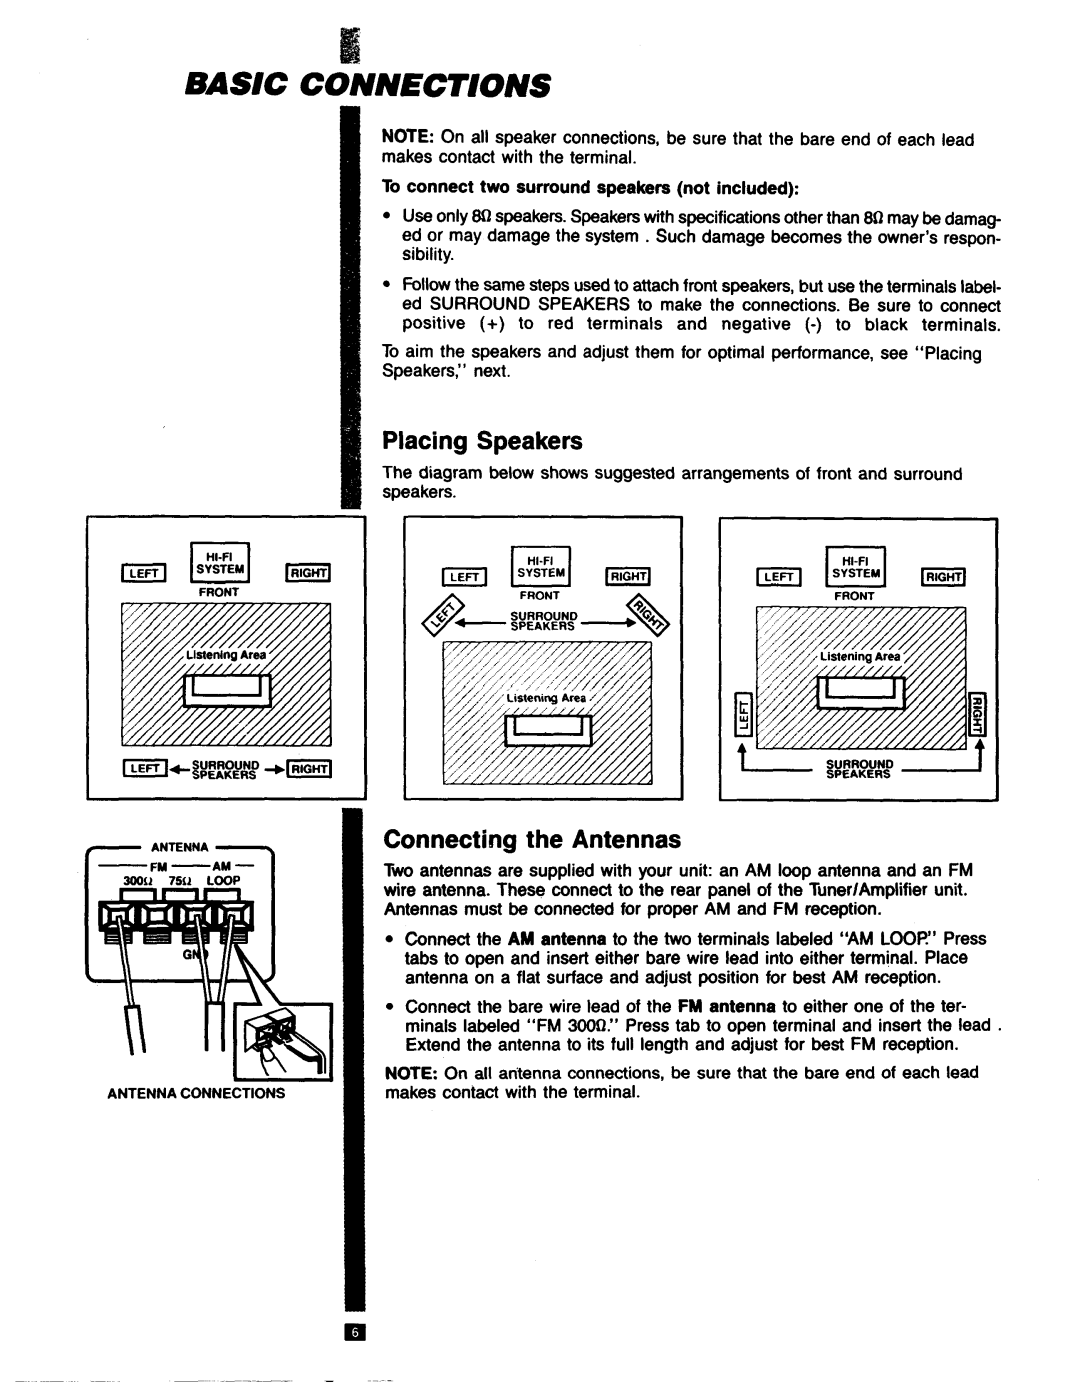 RCA RP-9753 manual Placing Speakers, Connecting the Antennas 